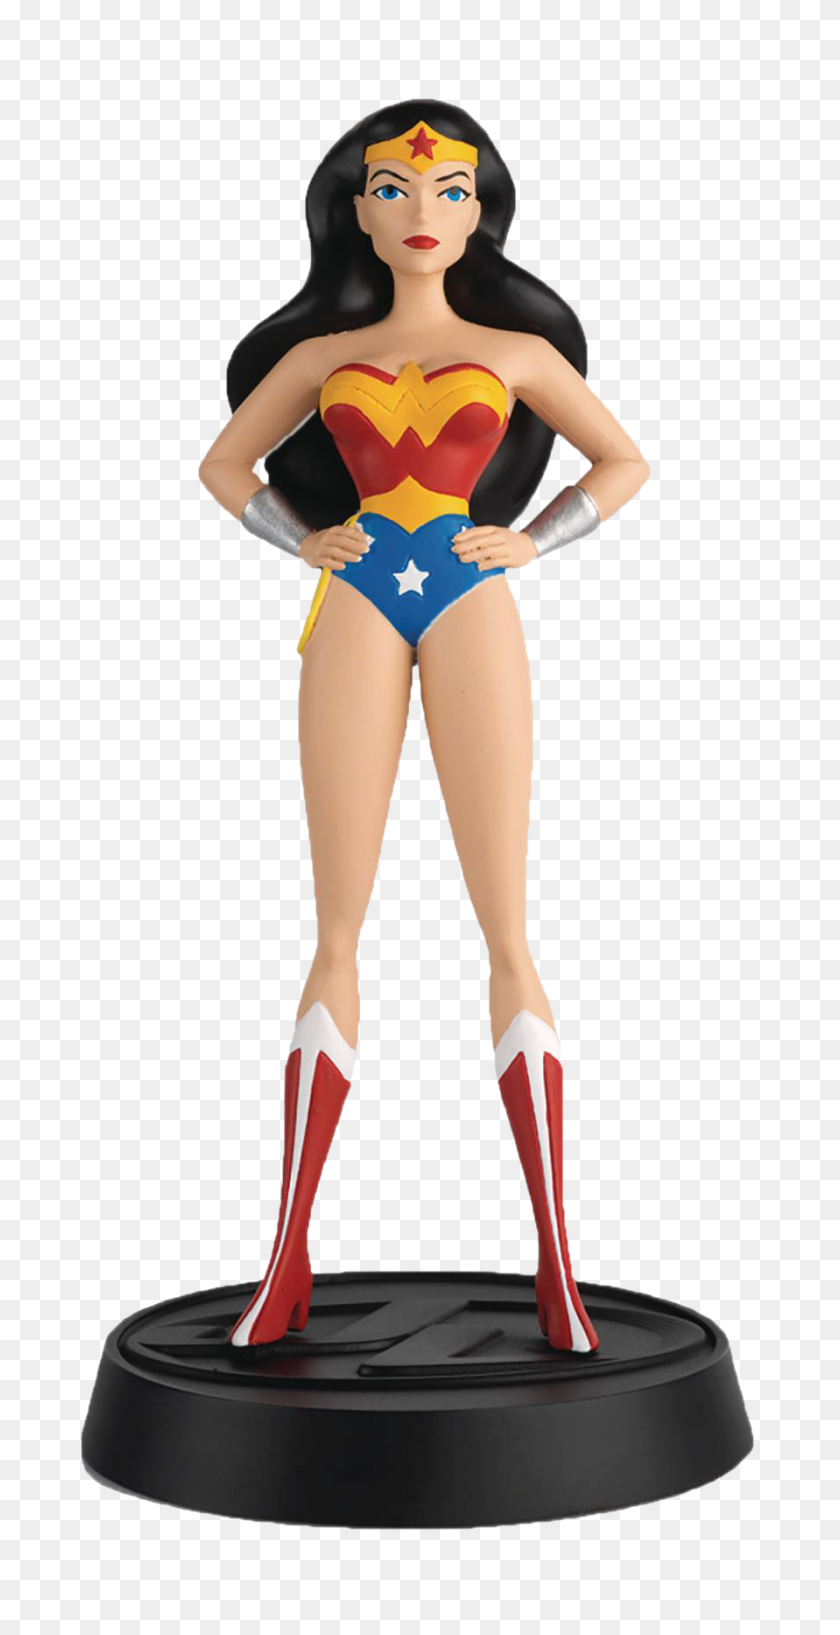 891x1800 Dc Justice League The Animated Series Series Wonder Woman Statue - Wonderwoman PNG